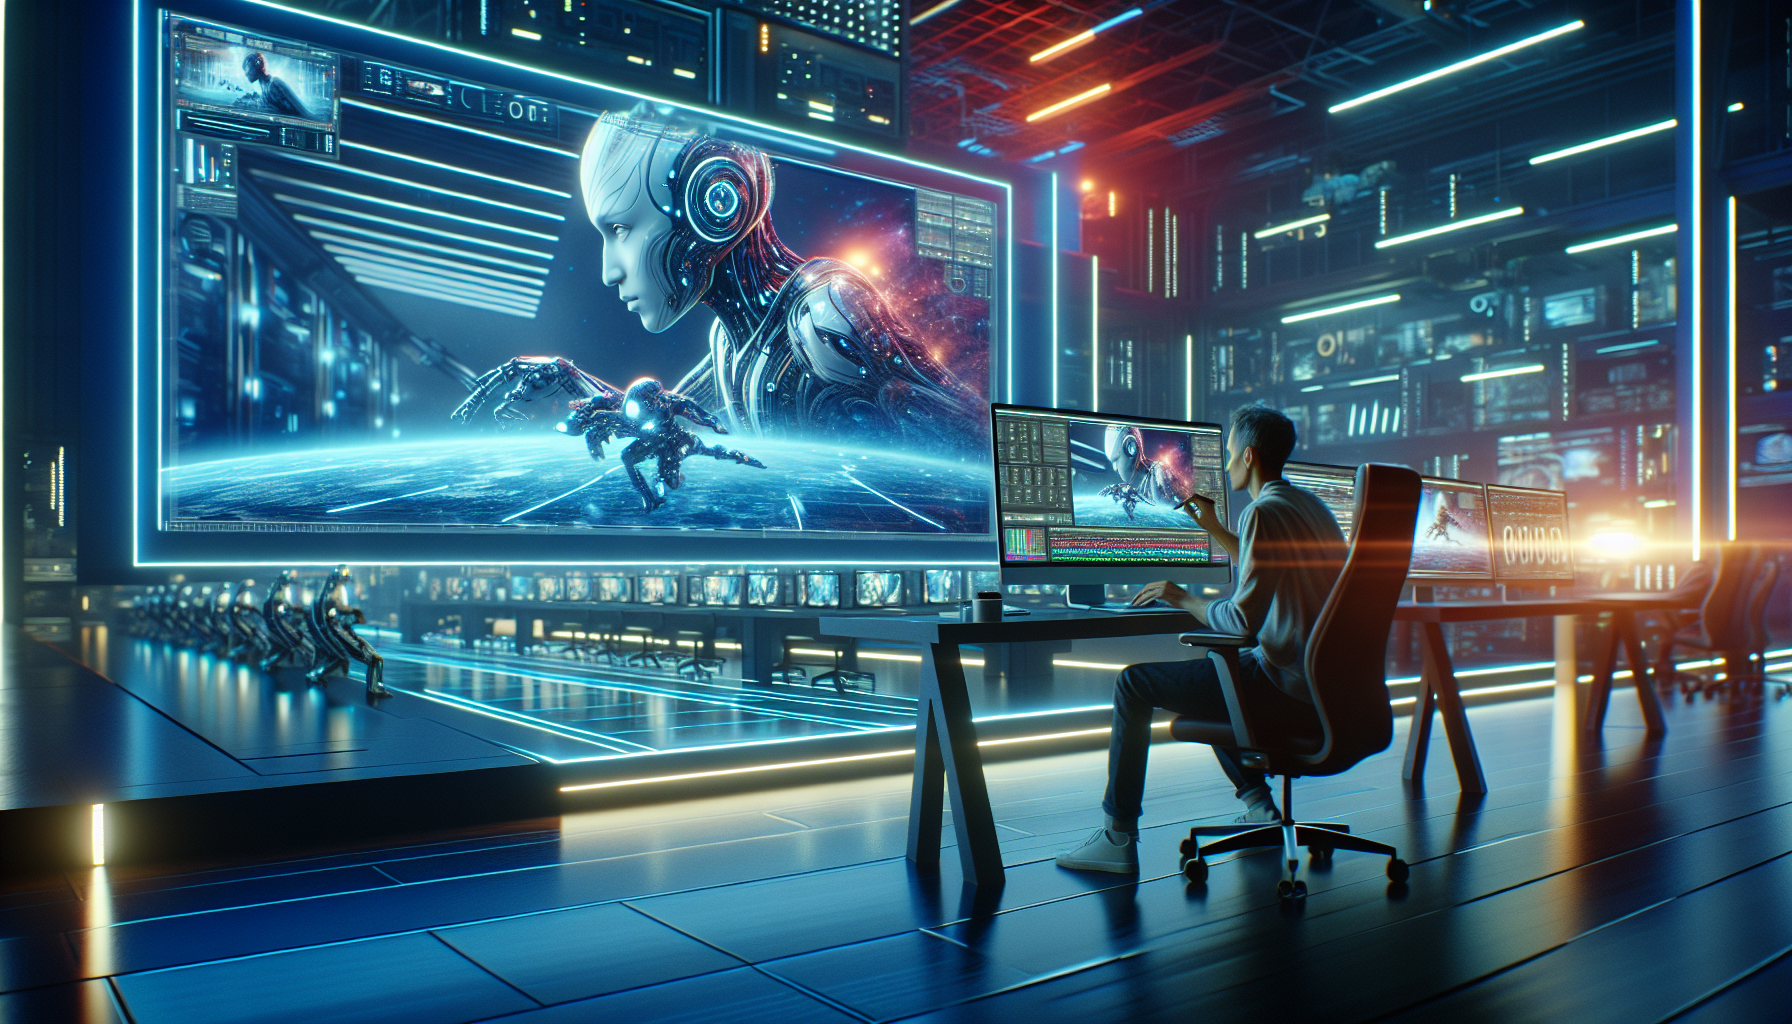 An artist using the latest Adobe Premiere Pro with generative AI tools to edit and enhance a futuristic sci-fi movie scene, displayed on a high-tech monitor in a sleek, modern workspace, surrounded by